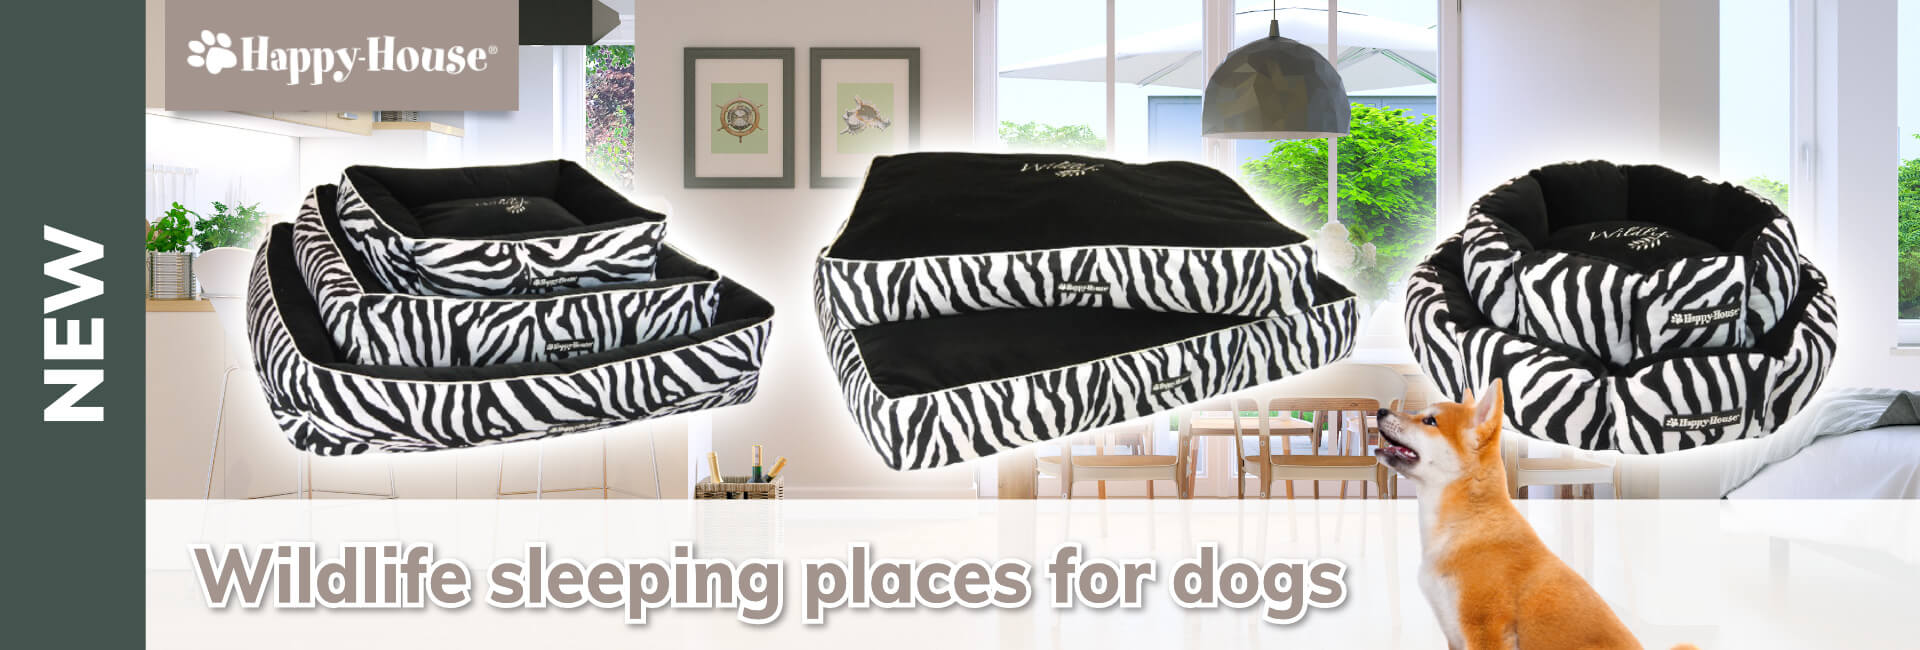 Happy-House Wildlife sleeping places for dogs